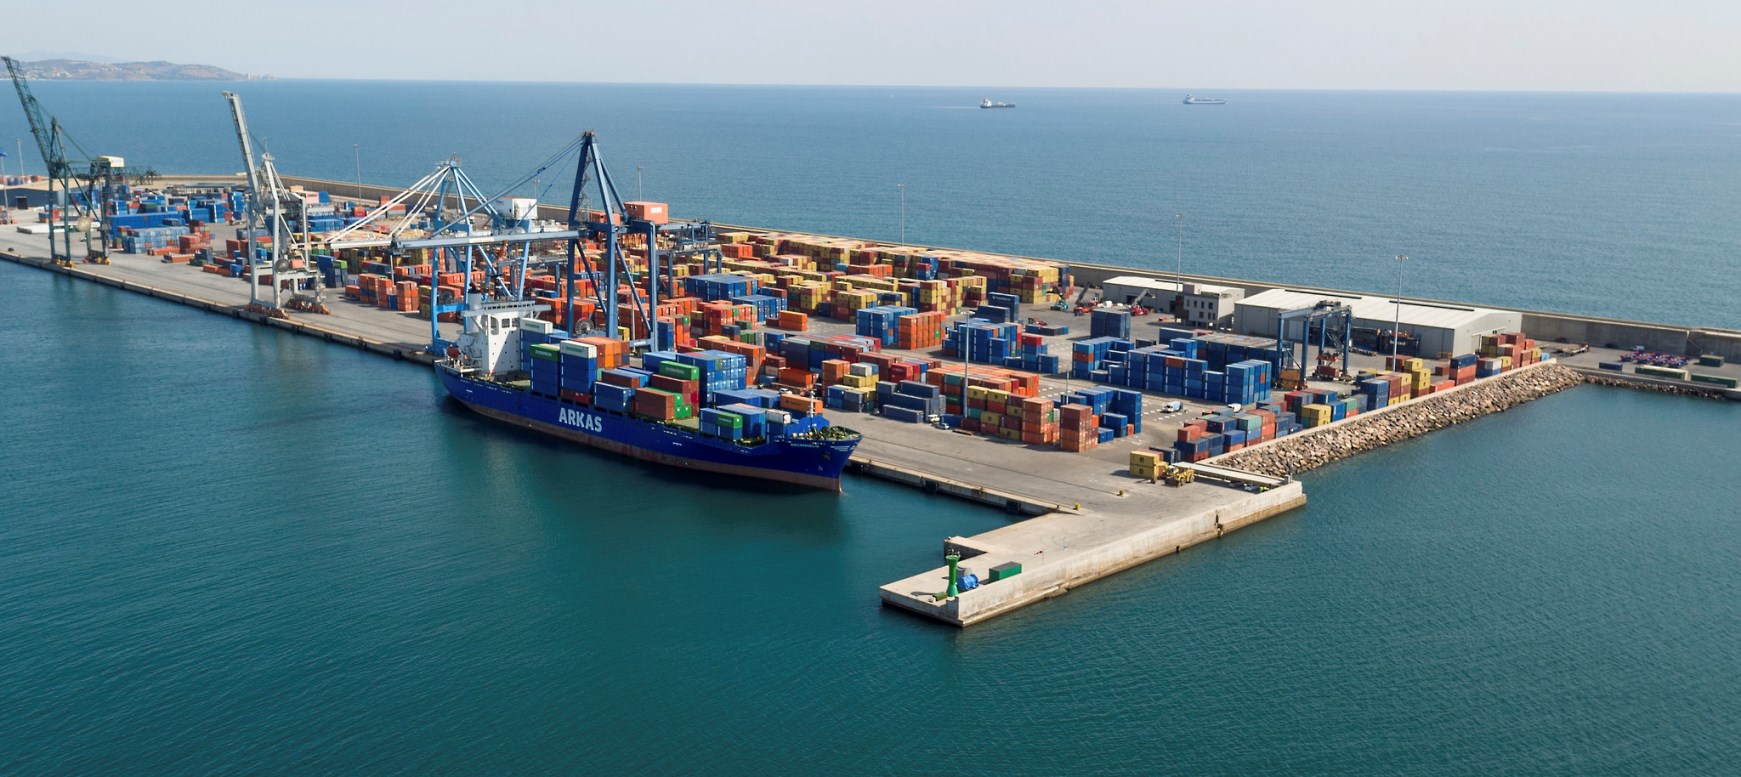 Sale of APM Terminals Castellón to Noatum Terminals Completed